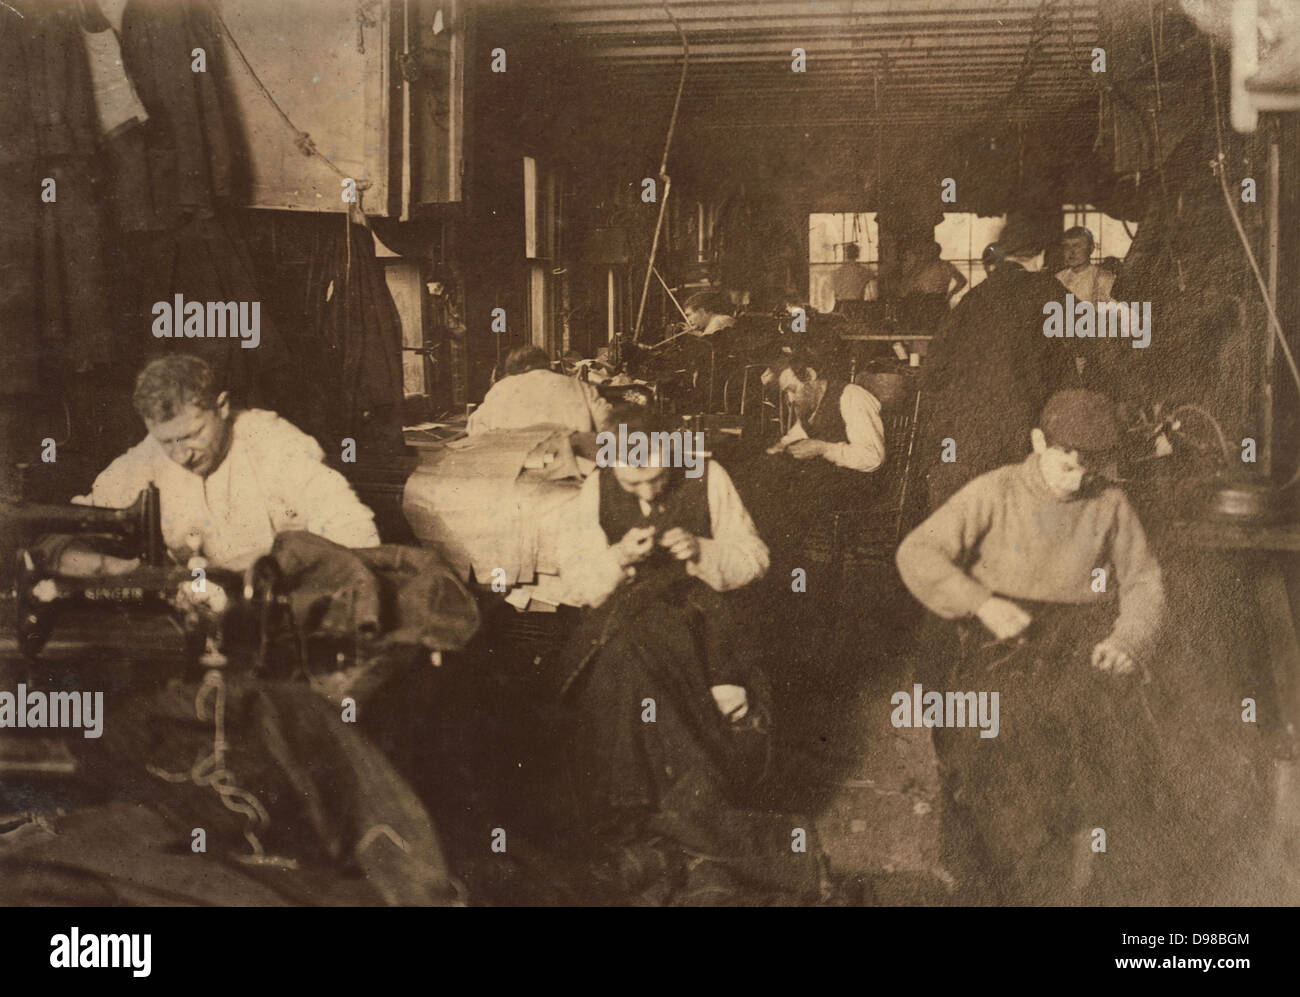 Immigrant workers: Men and a boy in a New York sweatshop, c1910. Photograph. Stock Photo